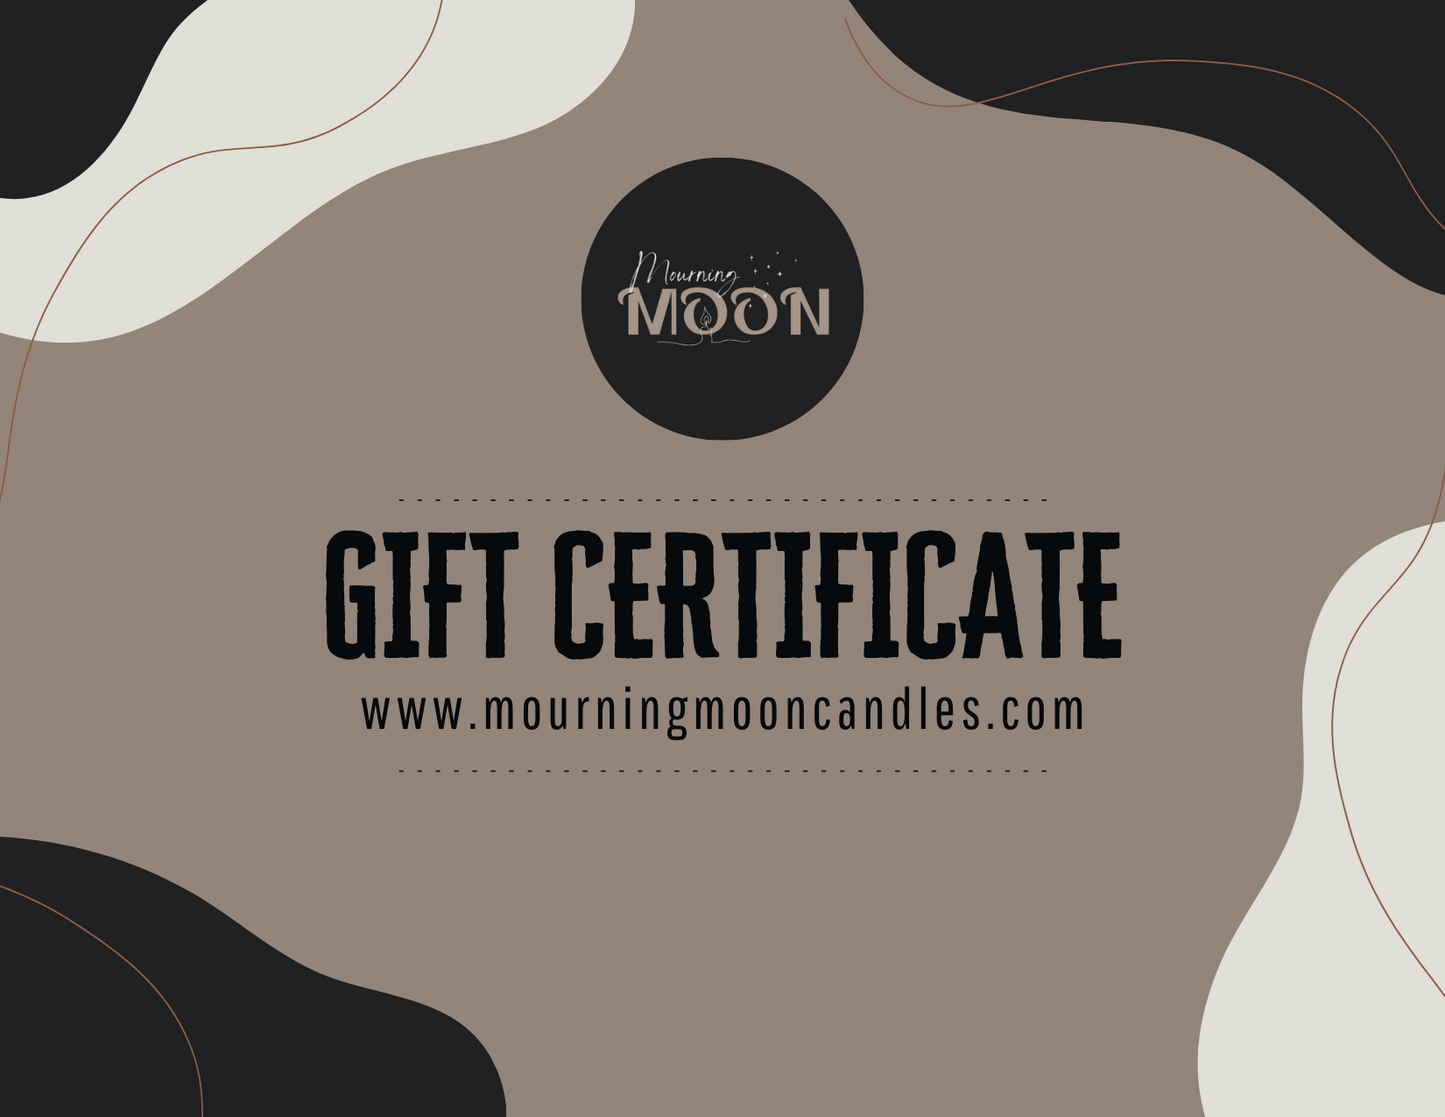 Mourning Moon Gift Card